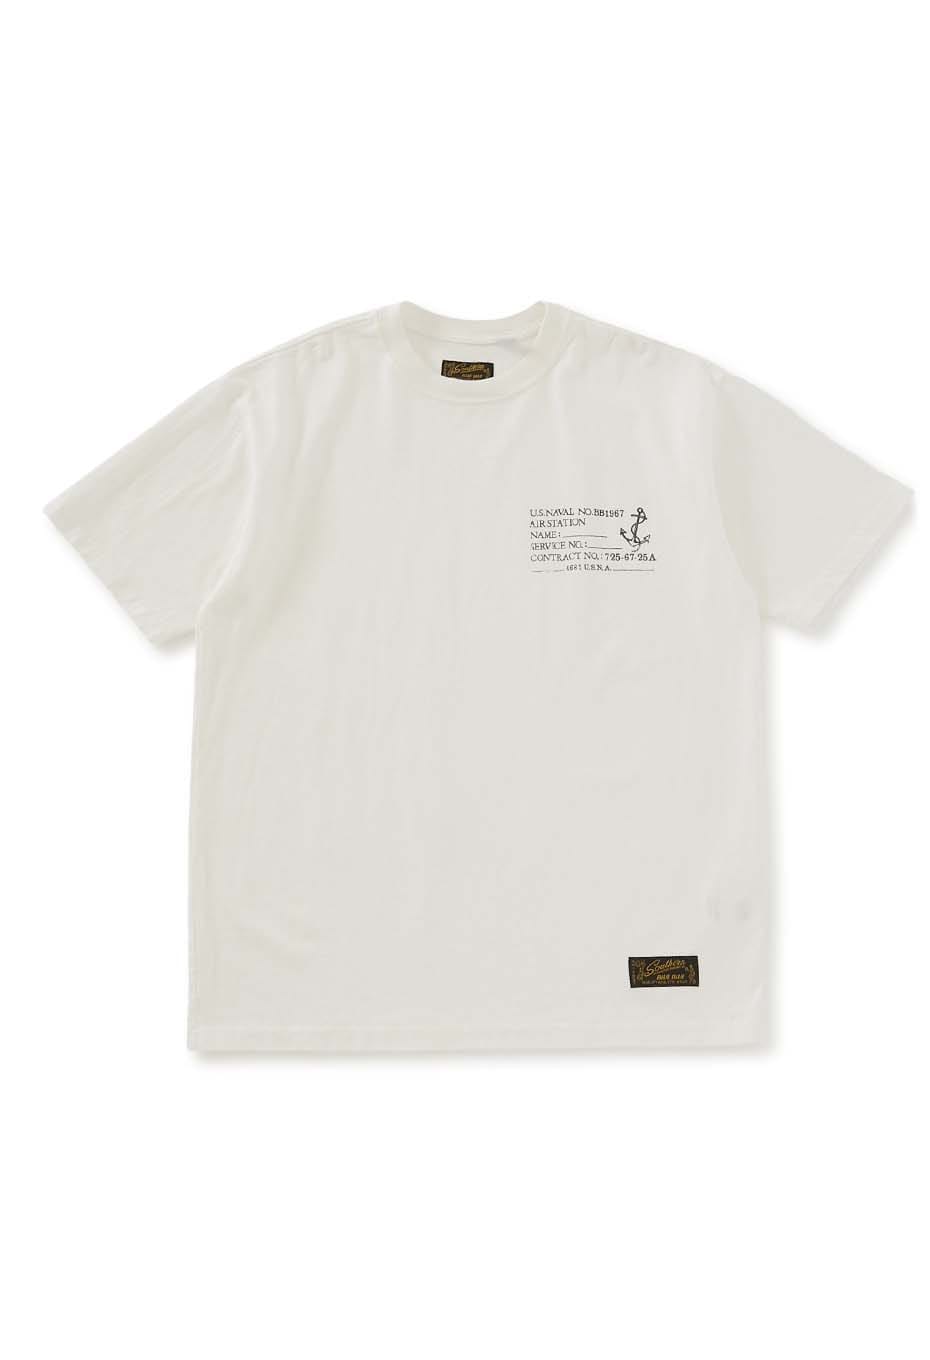 SOUTHERN MFG CO. BLUEBLUE ミルスペック プリント Tシャツ